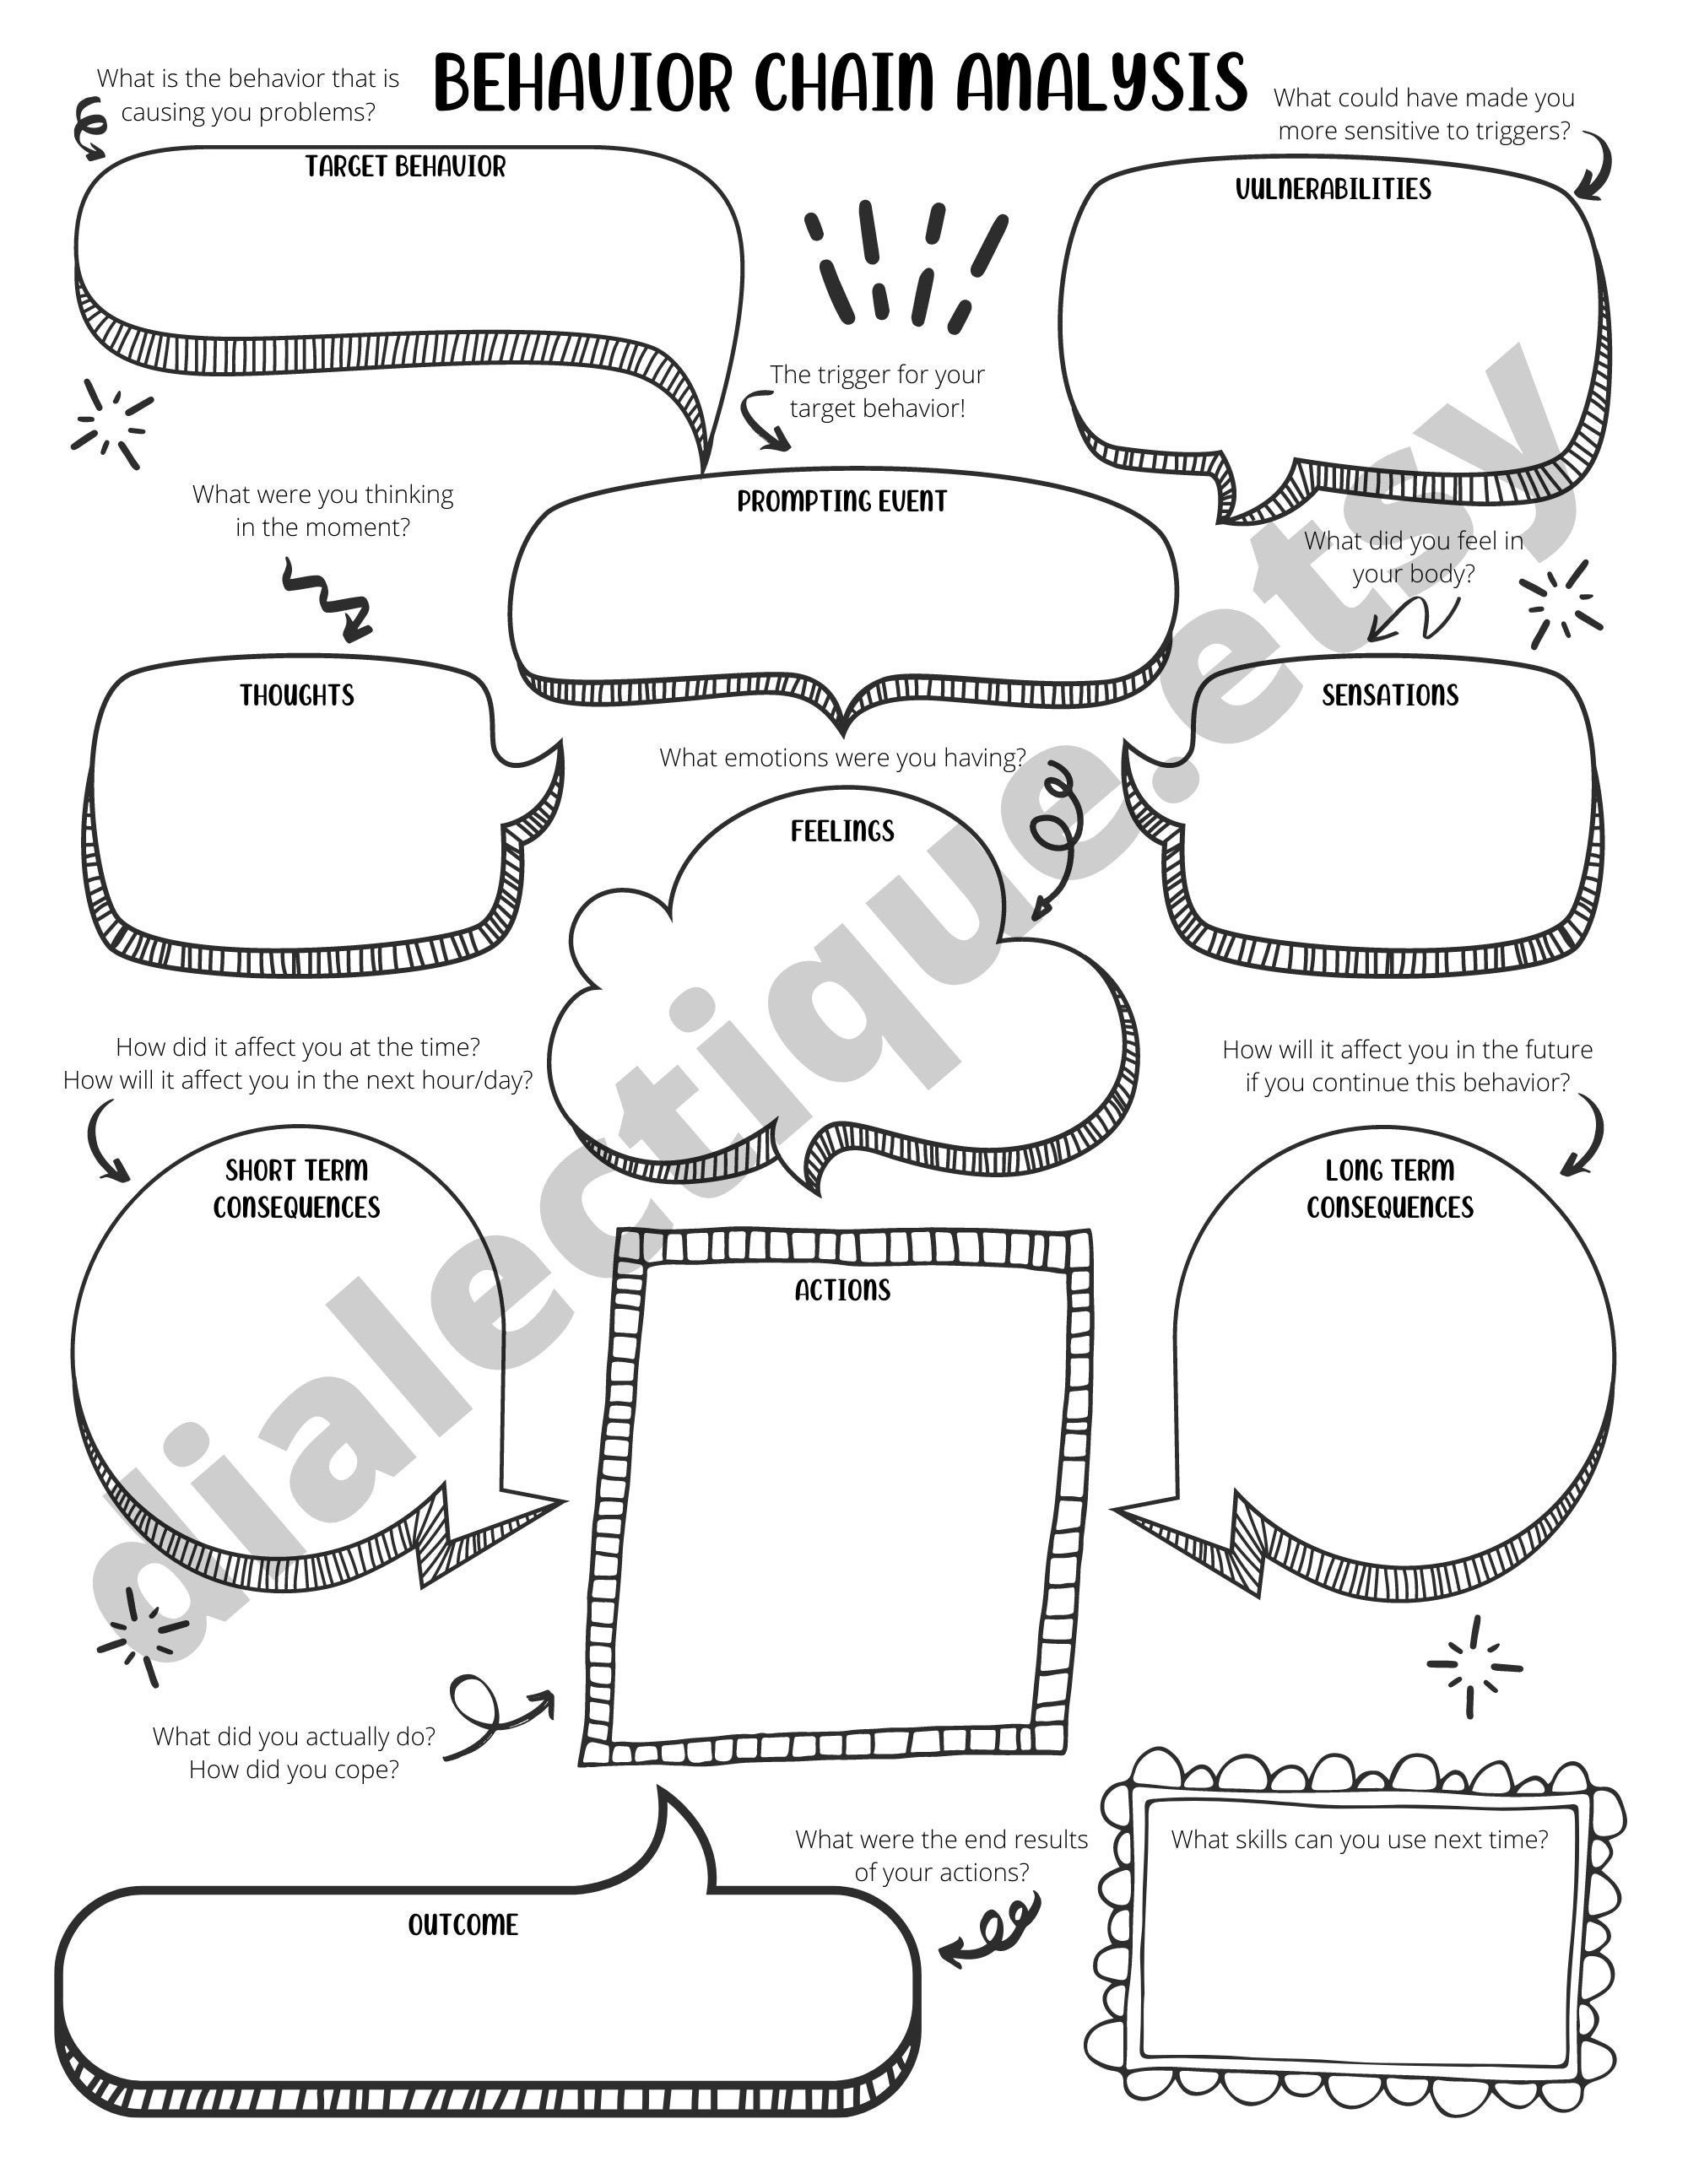 dbt-therapy-worksheets-homeschooldressagecom-14-best-images-of